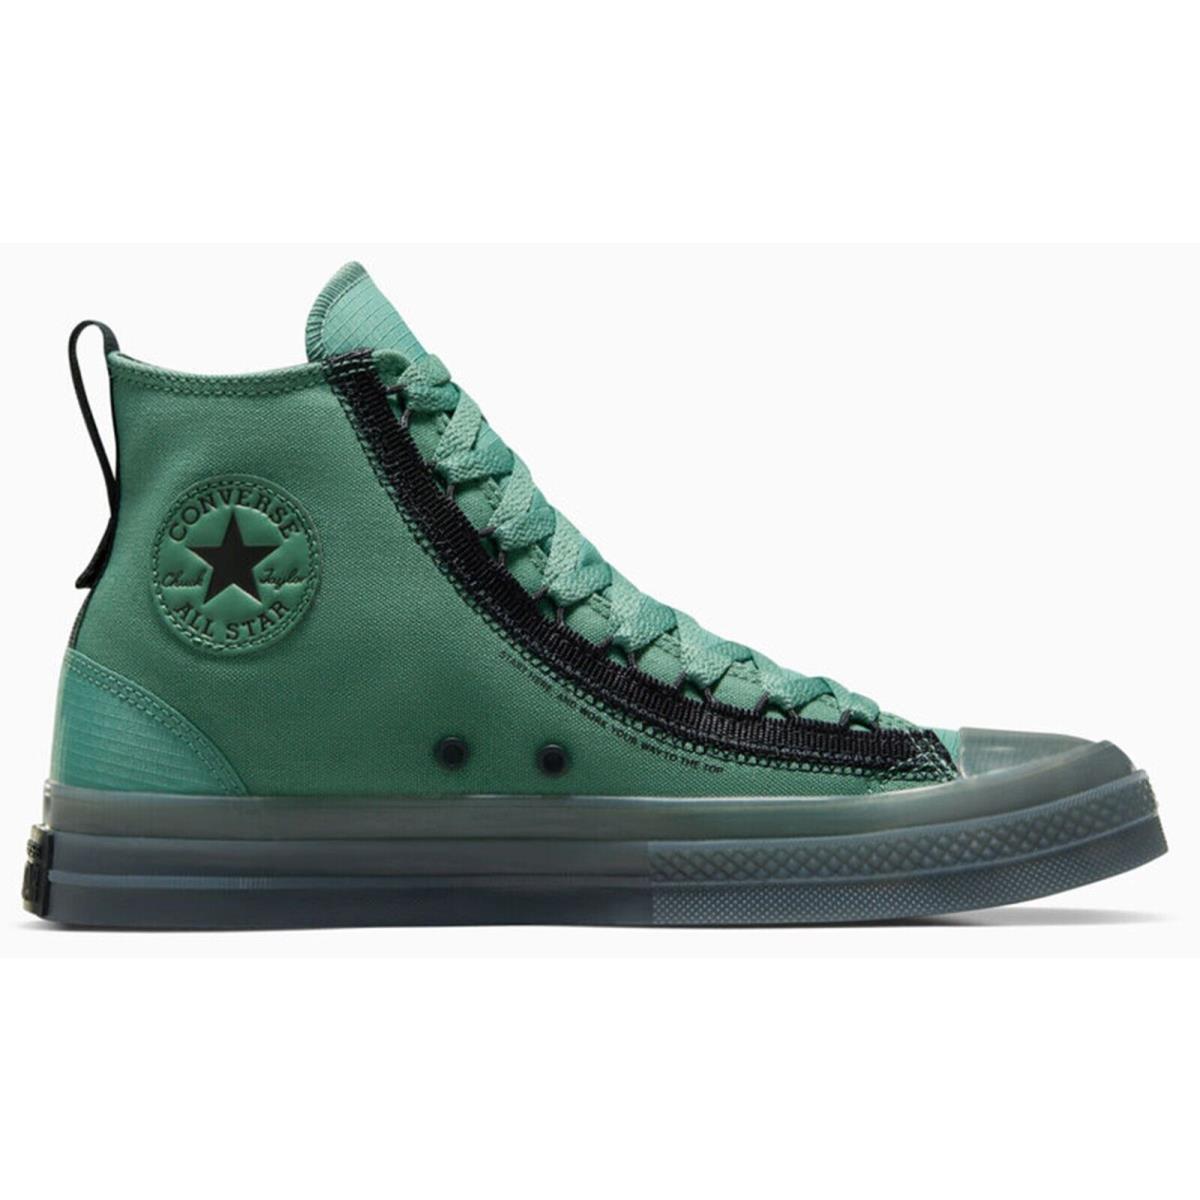 Converse Chuck Taylor All Star CX EXP2 High Top Shoes Limited Edition Green